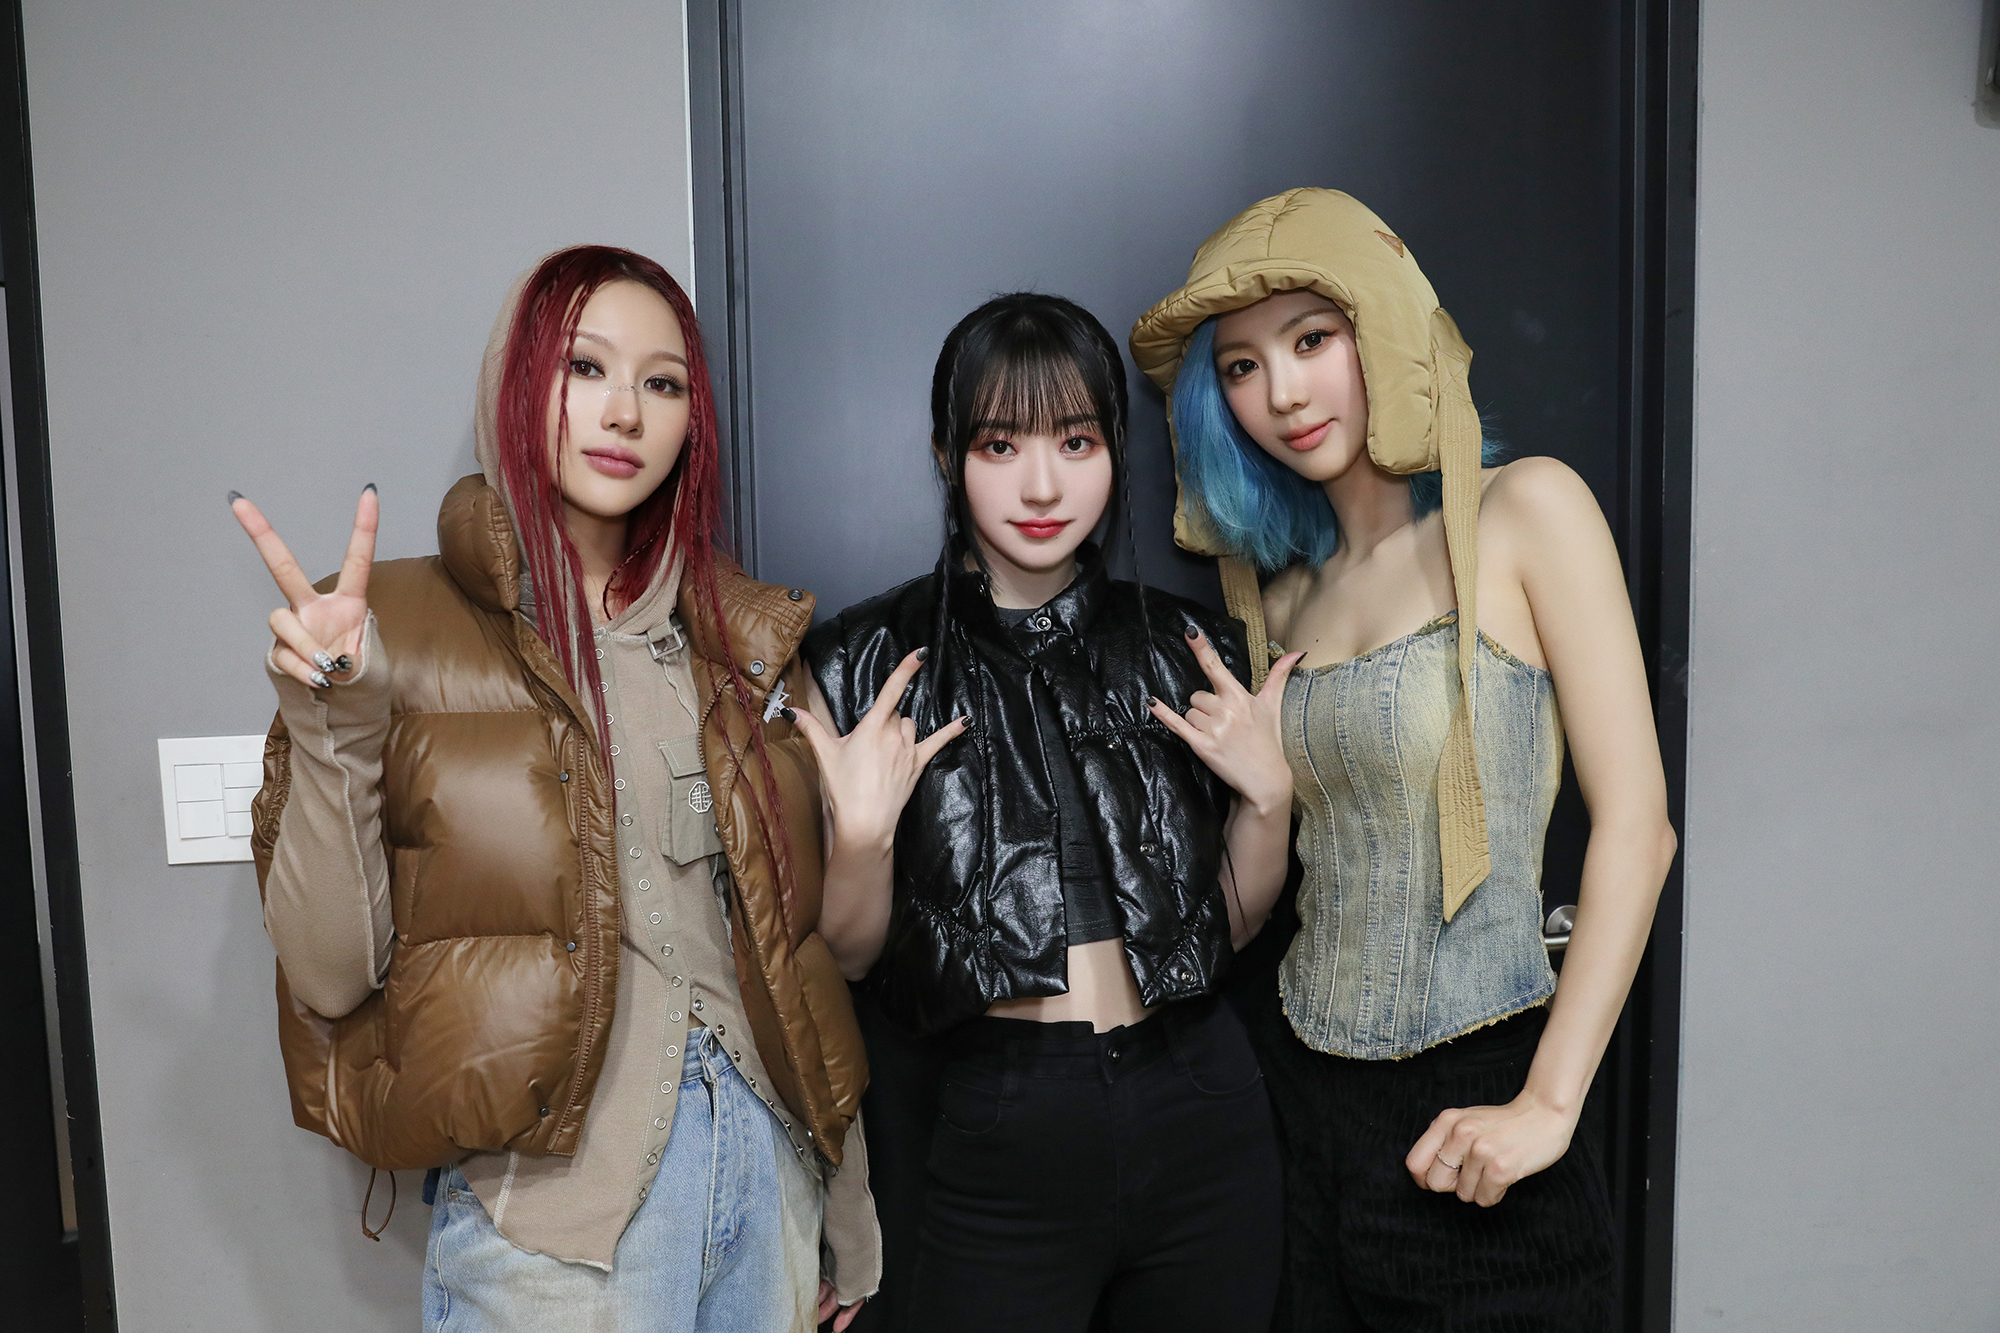 Siyeon, SuA and Yoohyeon dressed in casual and rock-style outfits for a music show.